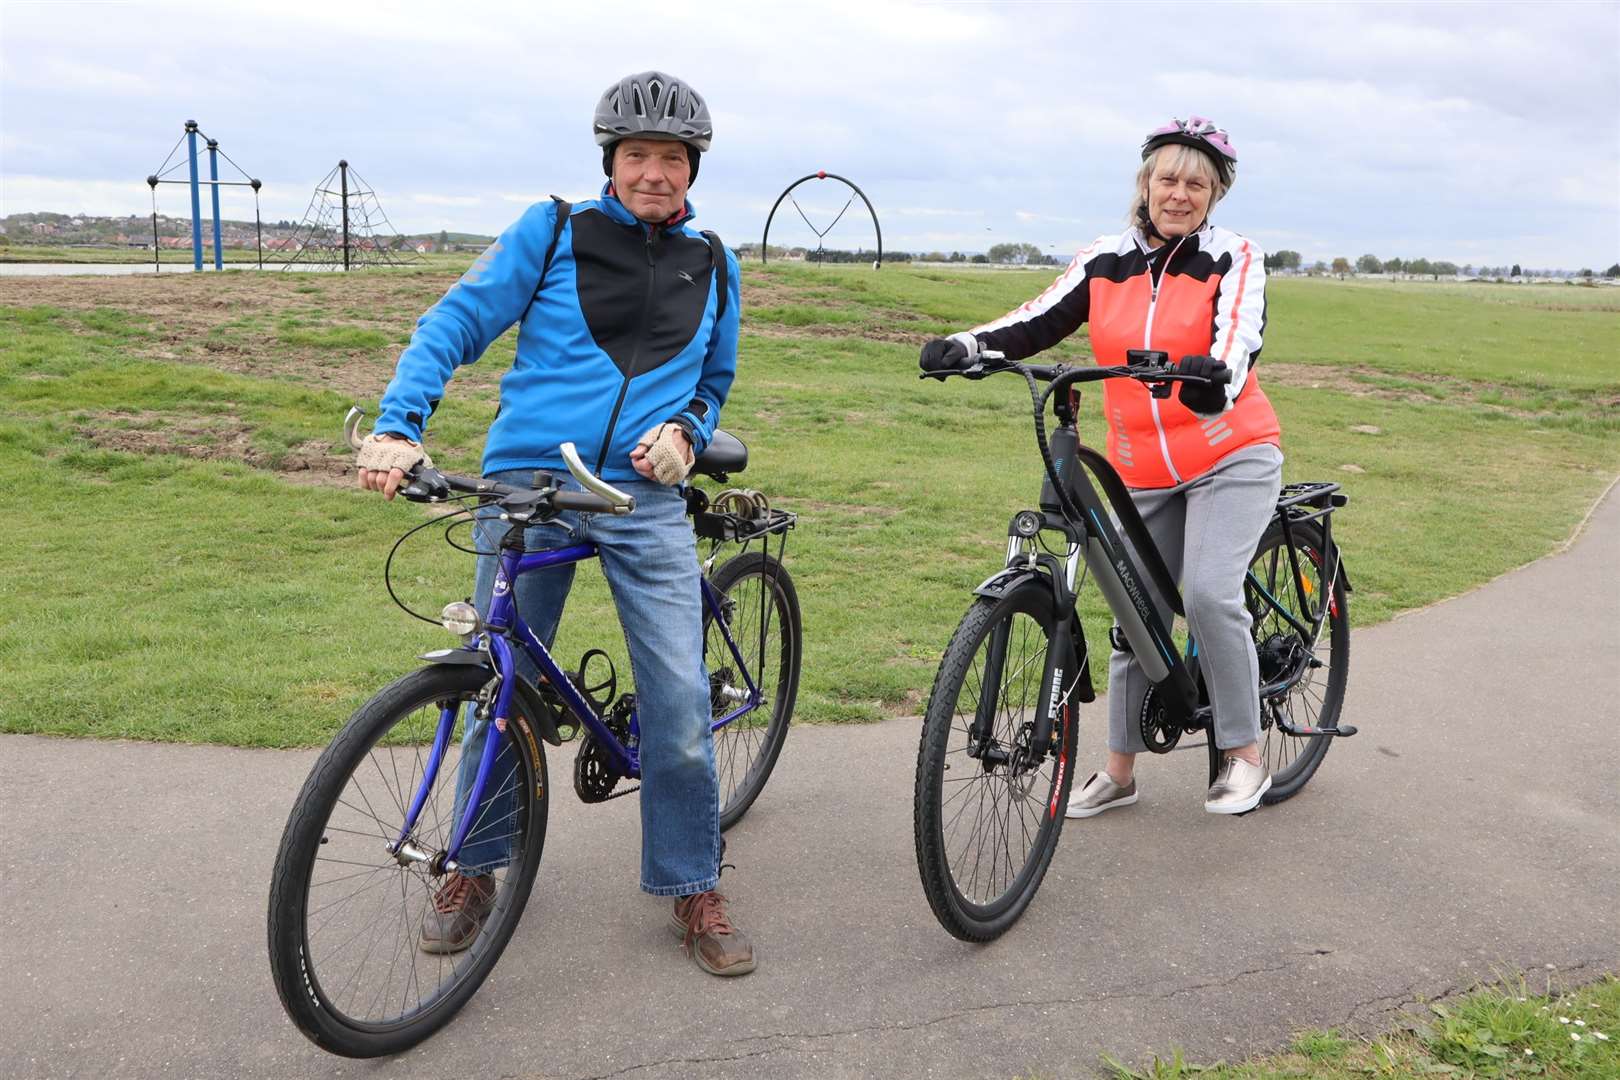 On their bikes: Mick Greenland and Teresa Bignell at Barton's Point Coastal Park, Sheerness